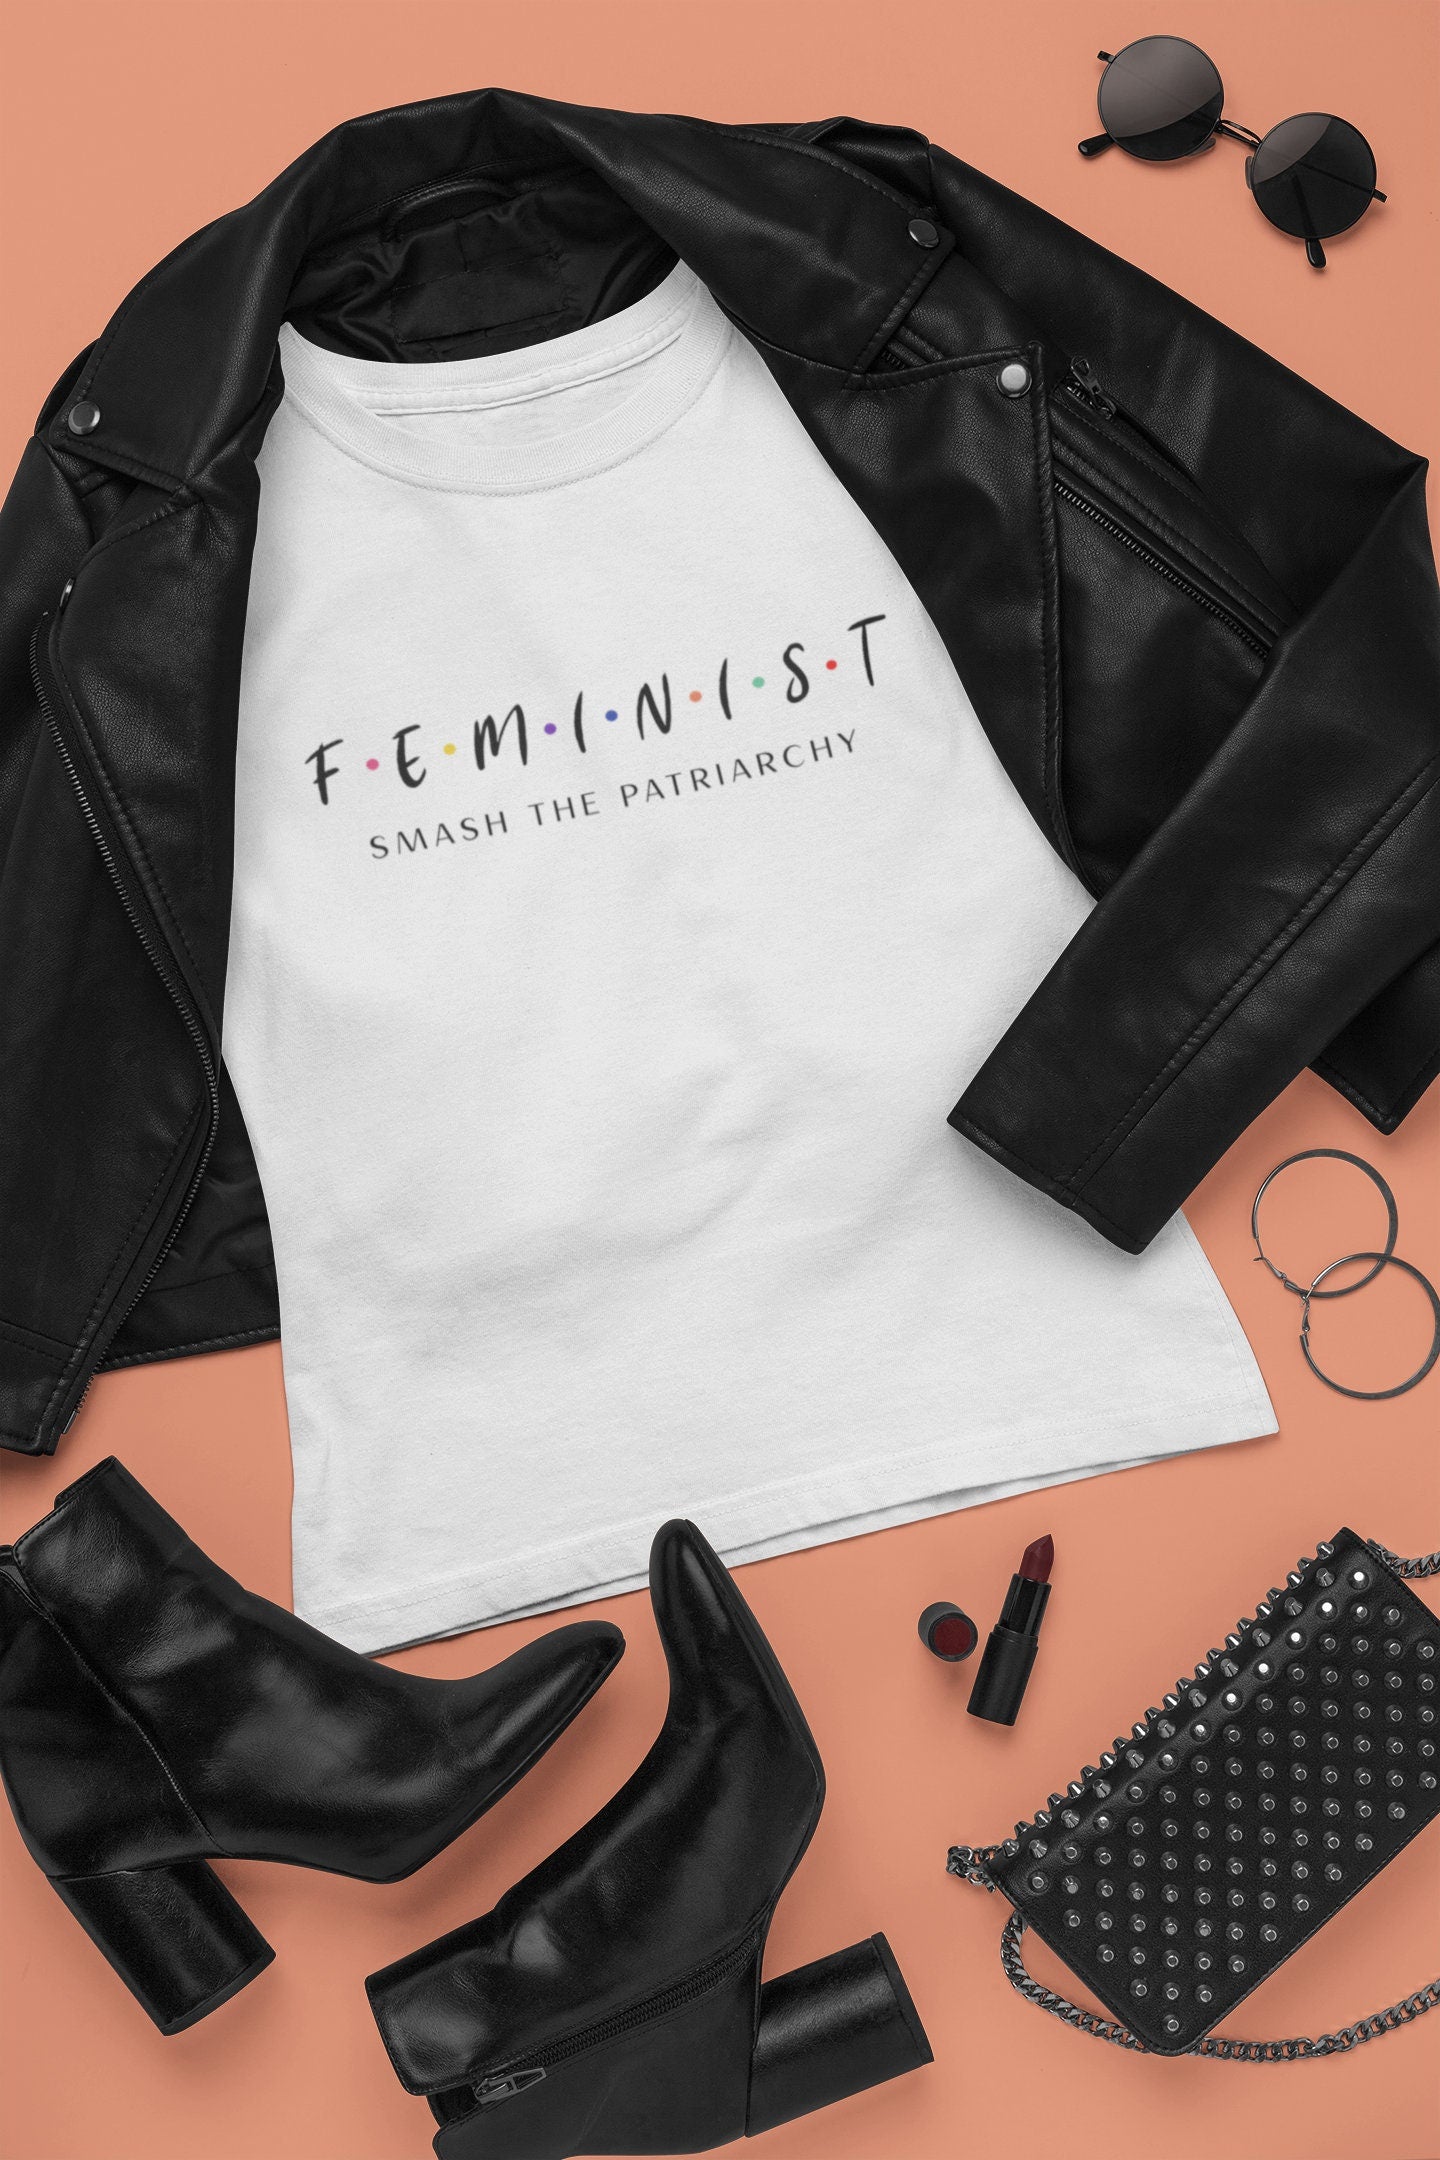 Smash The Patriarchy Shirt Feminist Shirt Feminist t shirts for women Feminism shirt Feminist Gift for her plus size available unisex tee